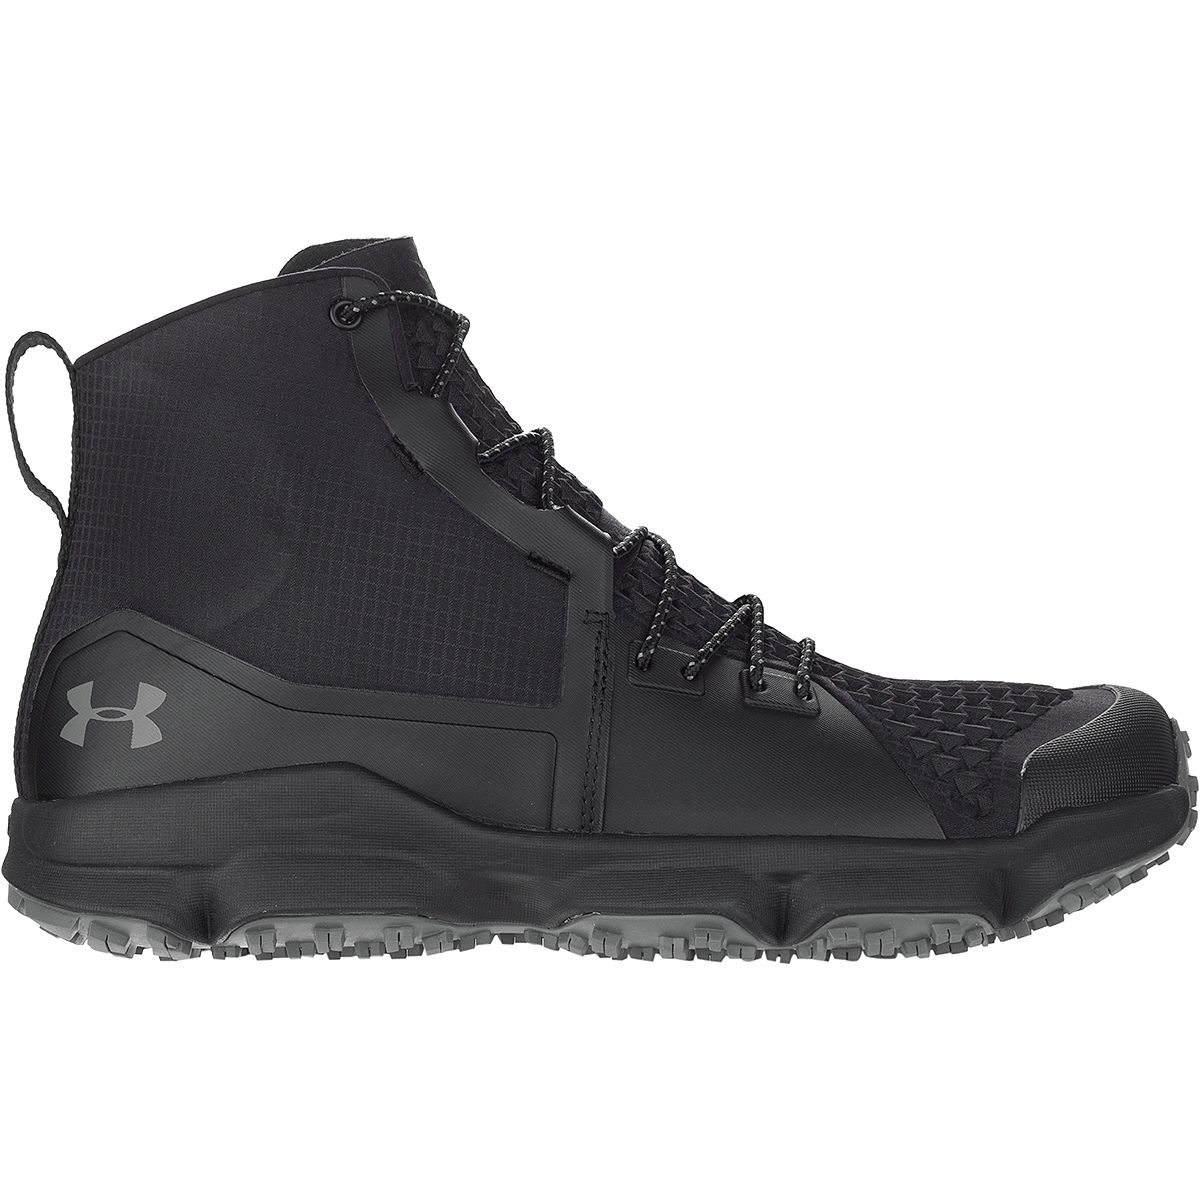 Under Armour Men's UA SpeedFit Hike Boots - Black/White/Red 10.5 